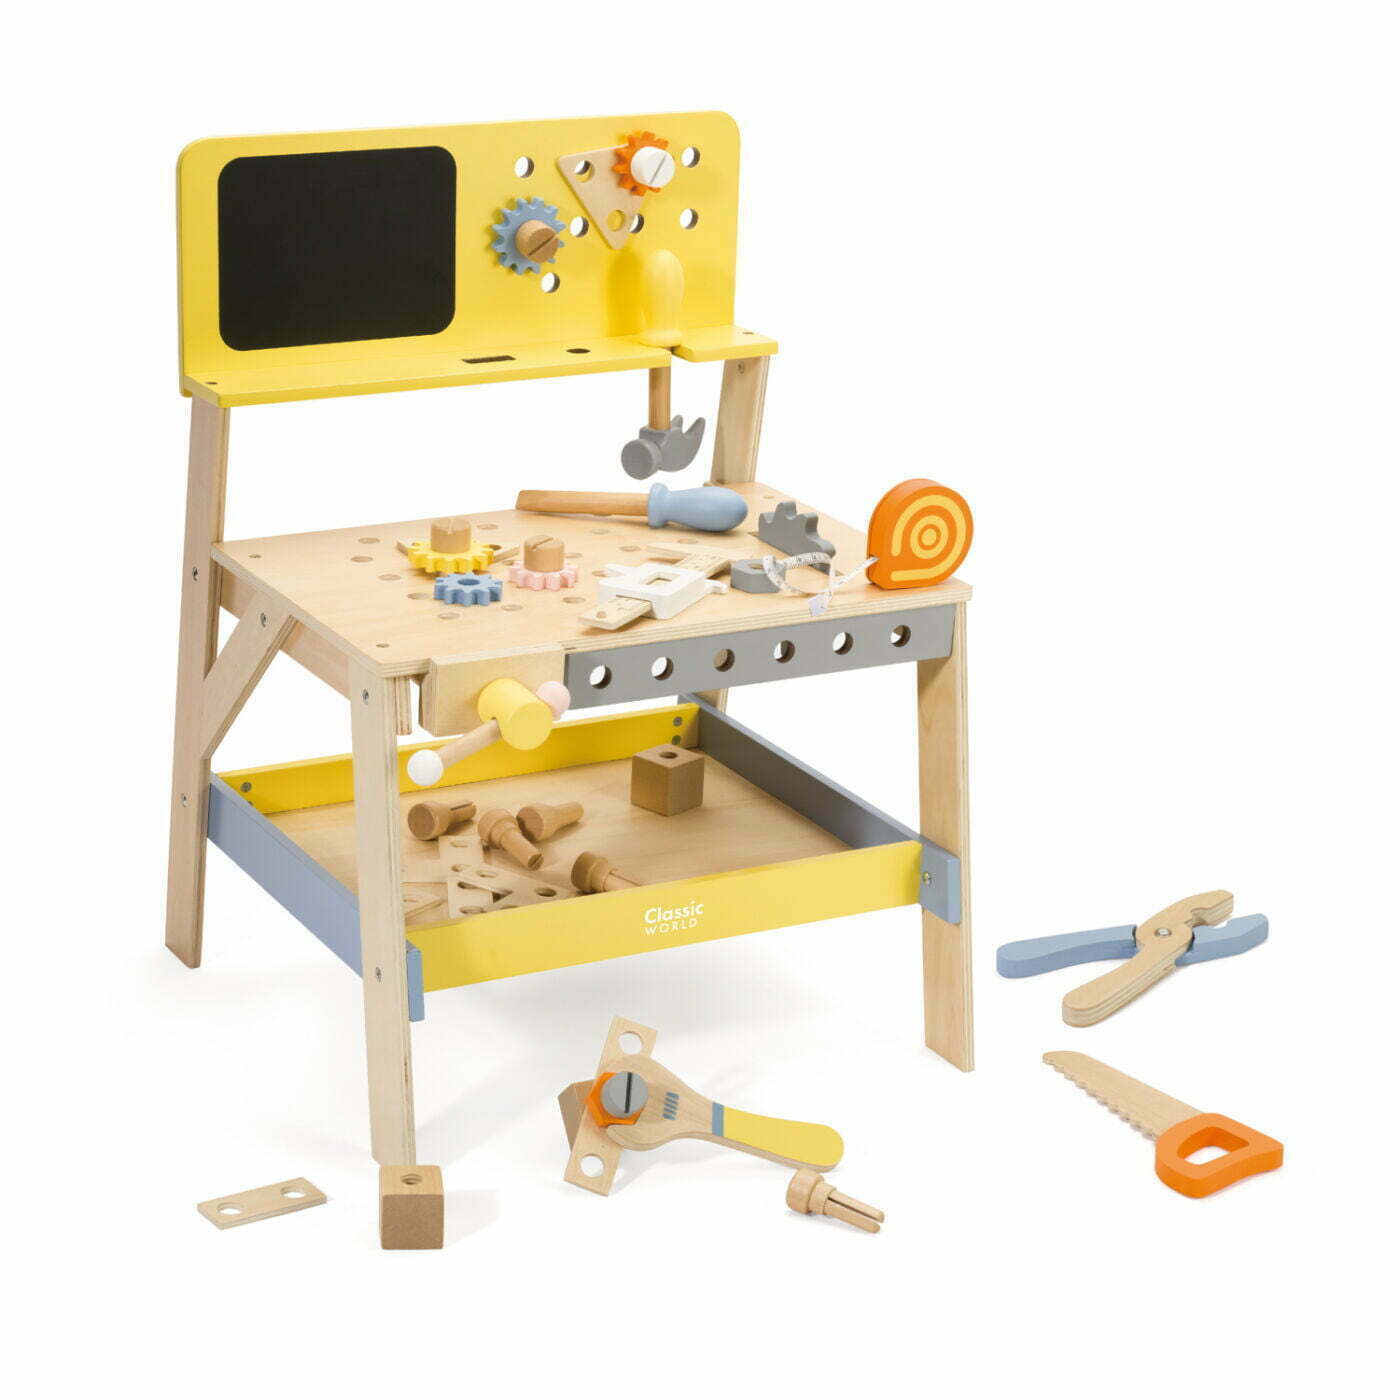 bright yellow and natural wood workbench with various tools 